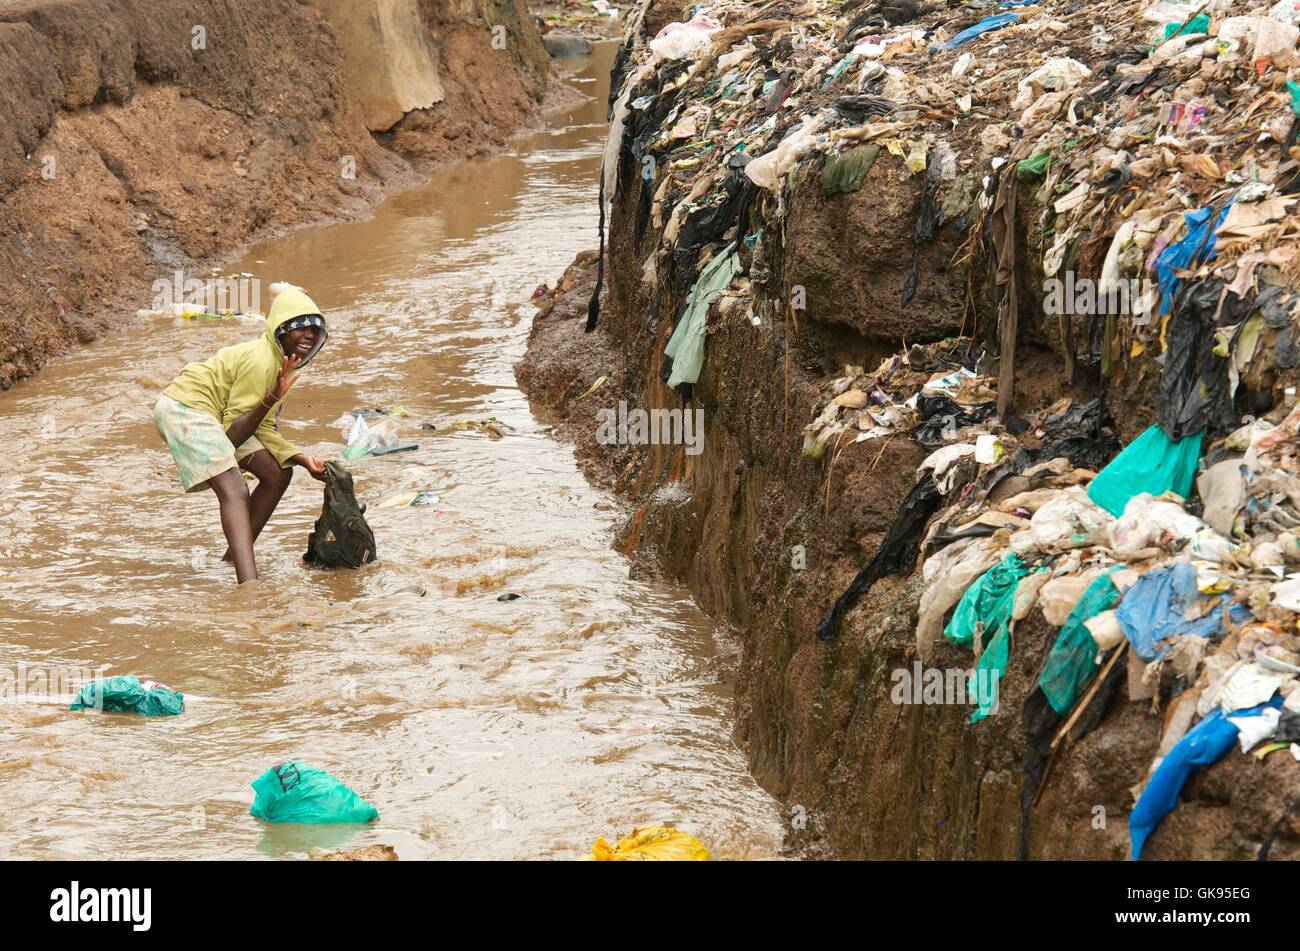 Child playing in foul river of Kibera Slums. Stock Photo